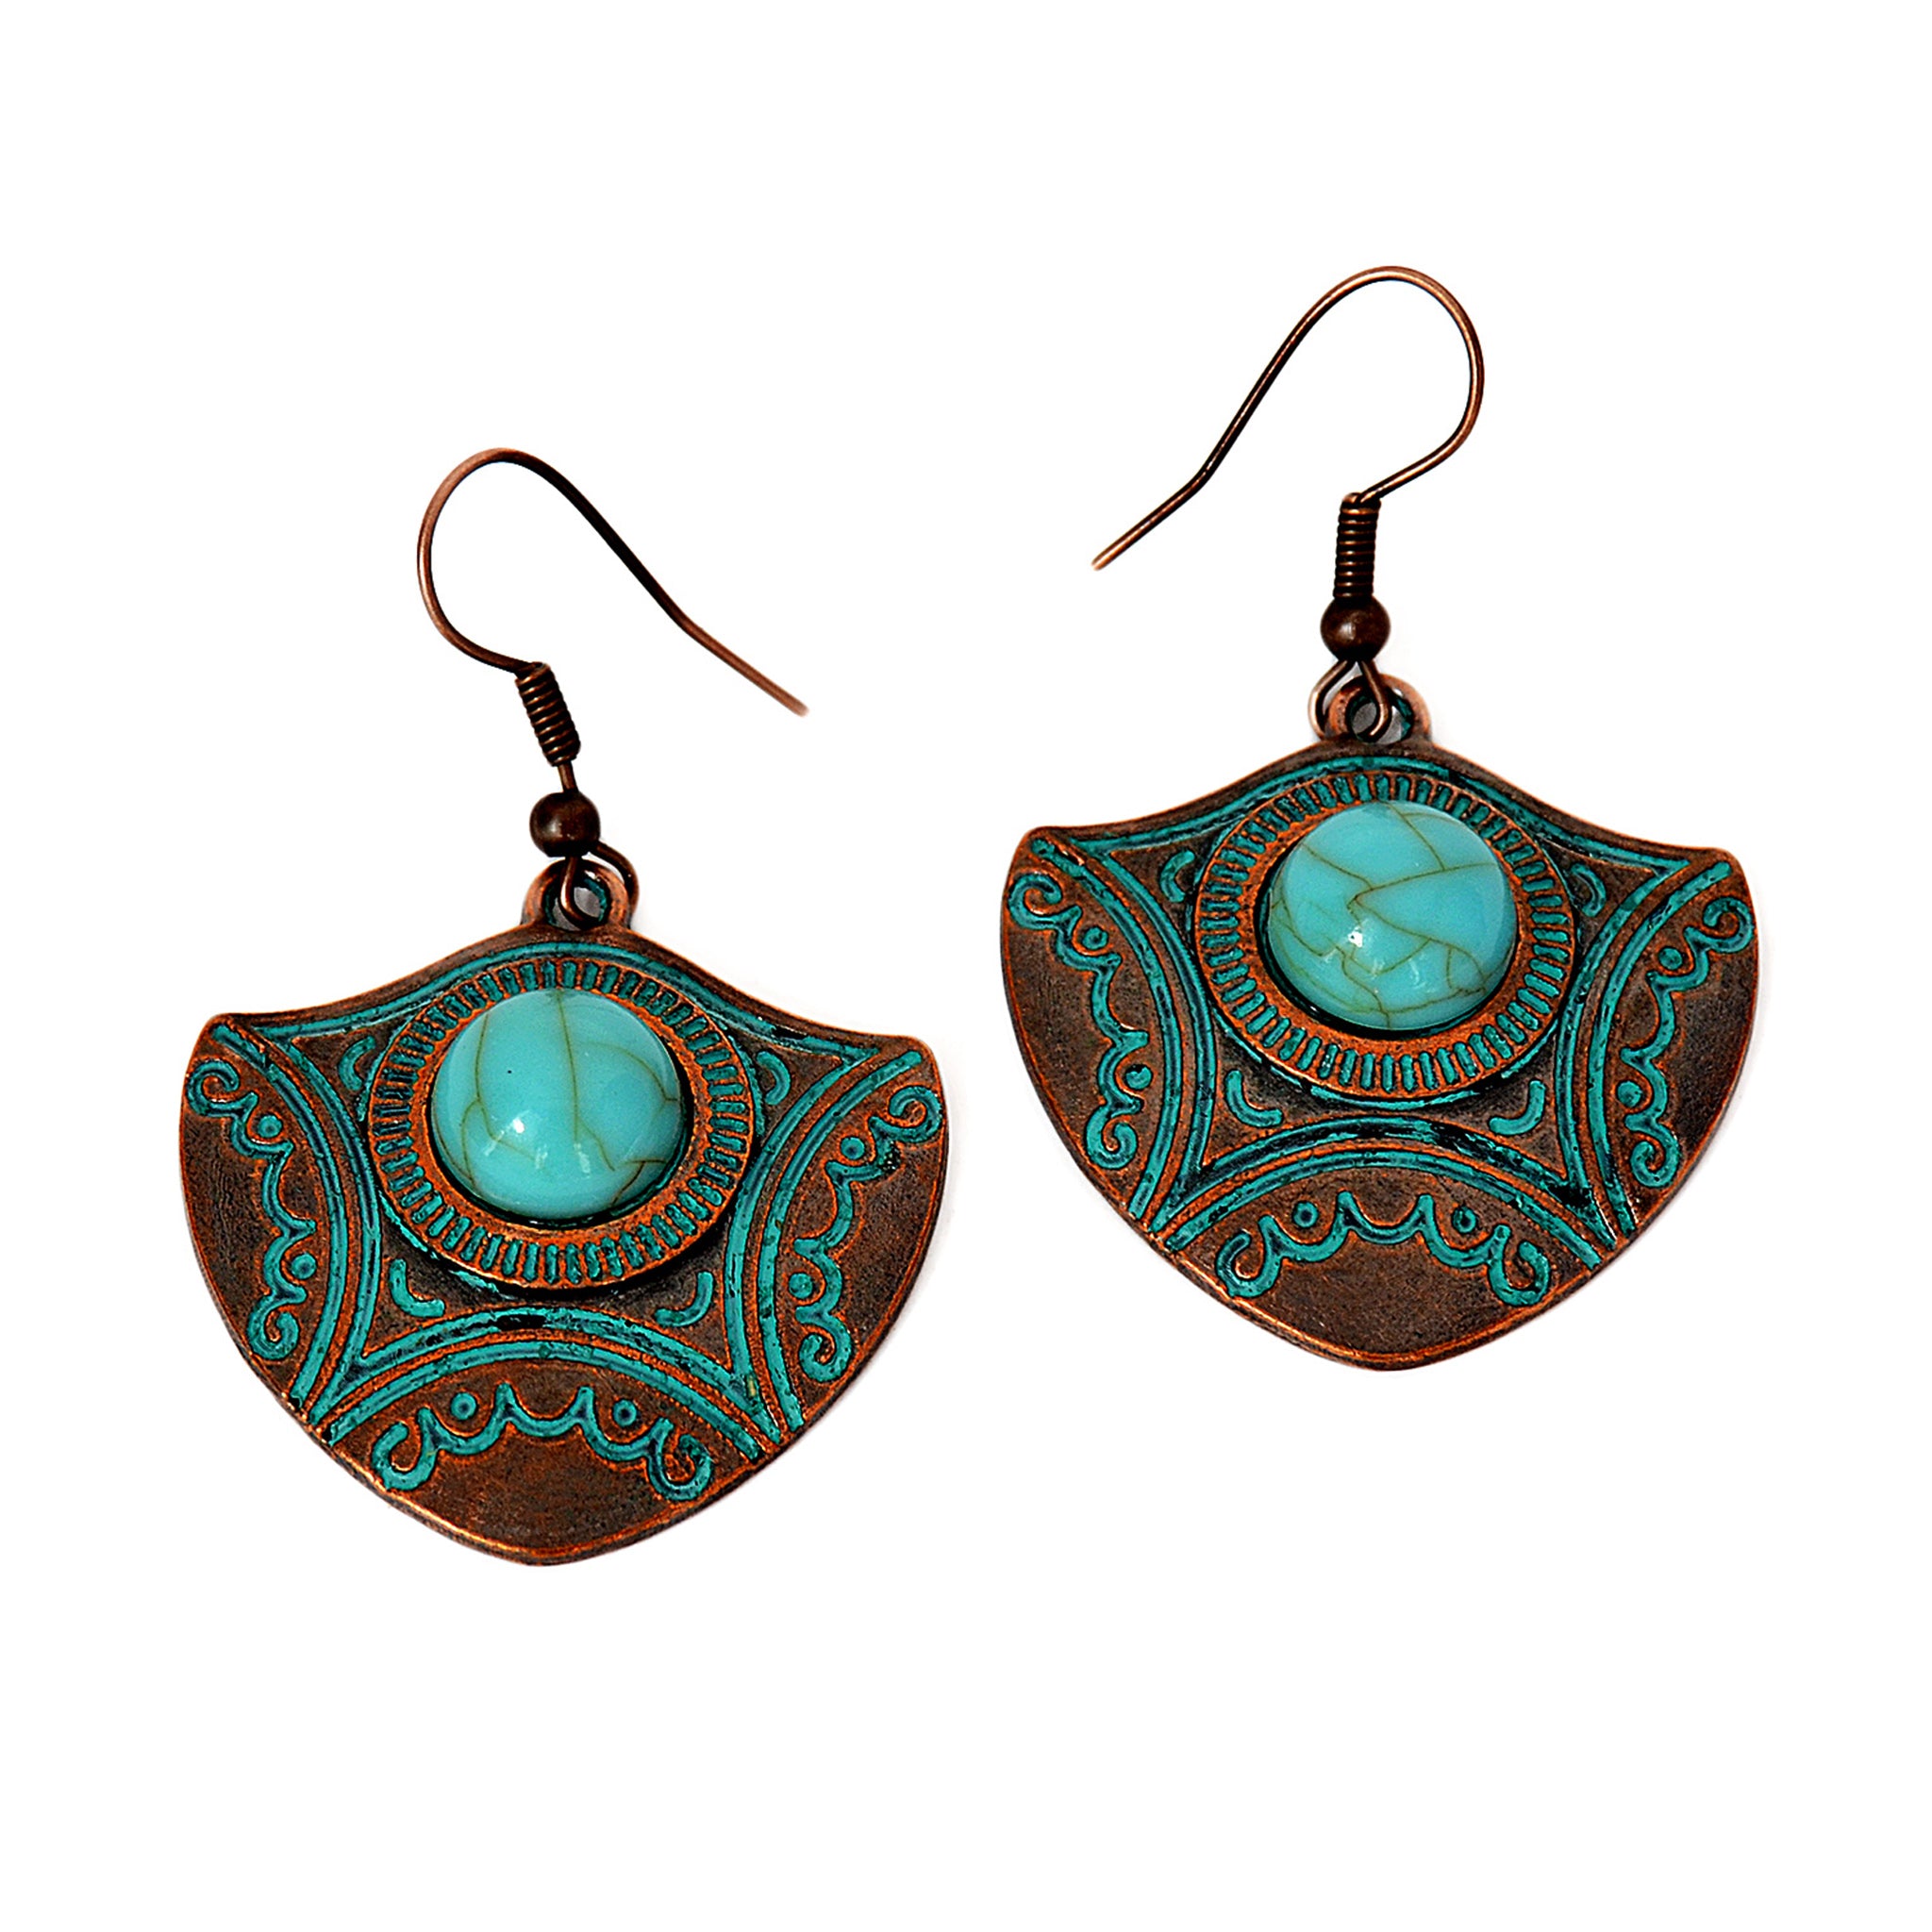 Arrow hook earrings with turquoise bead and blue patina on copper